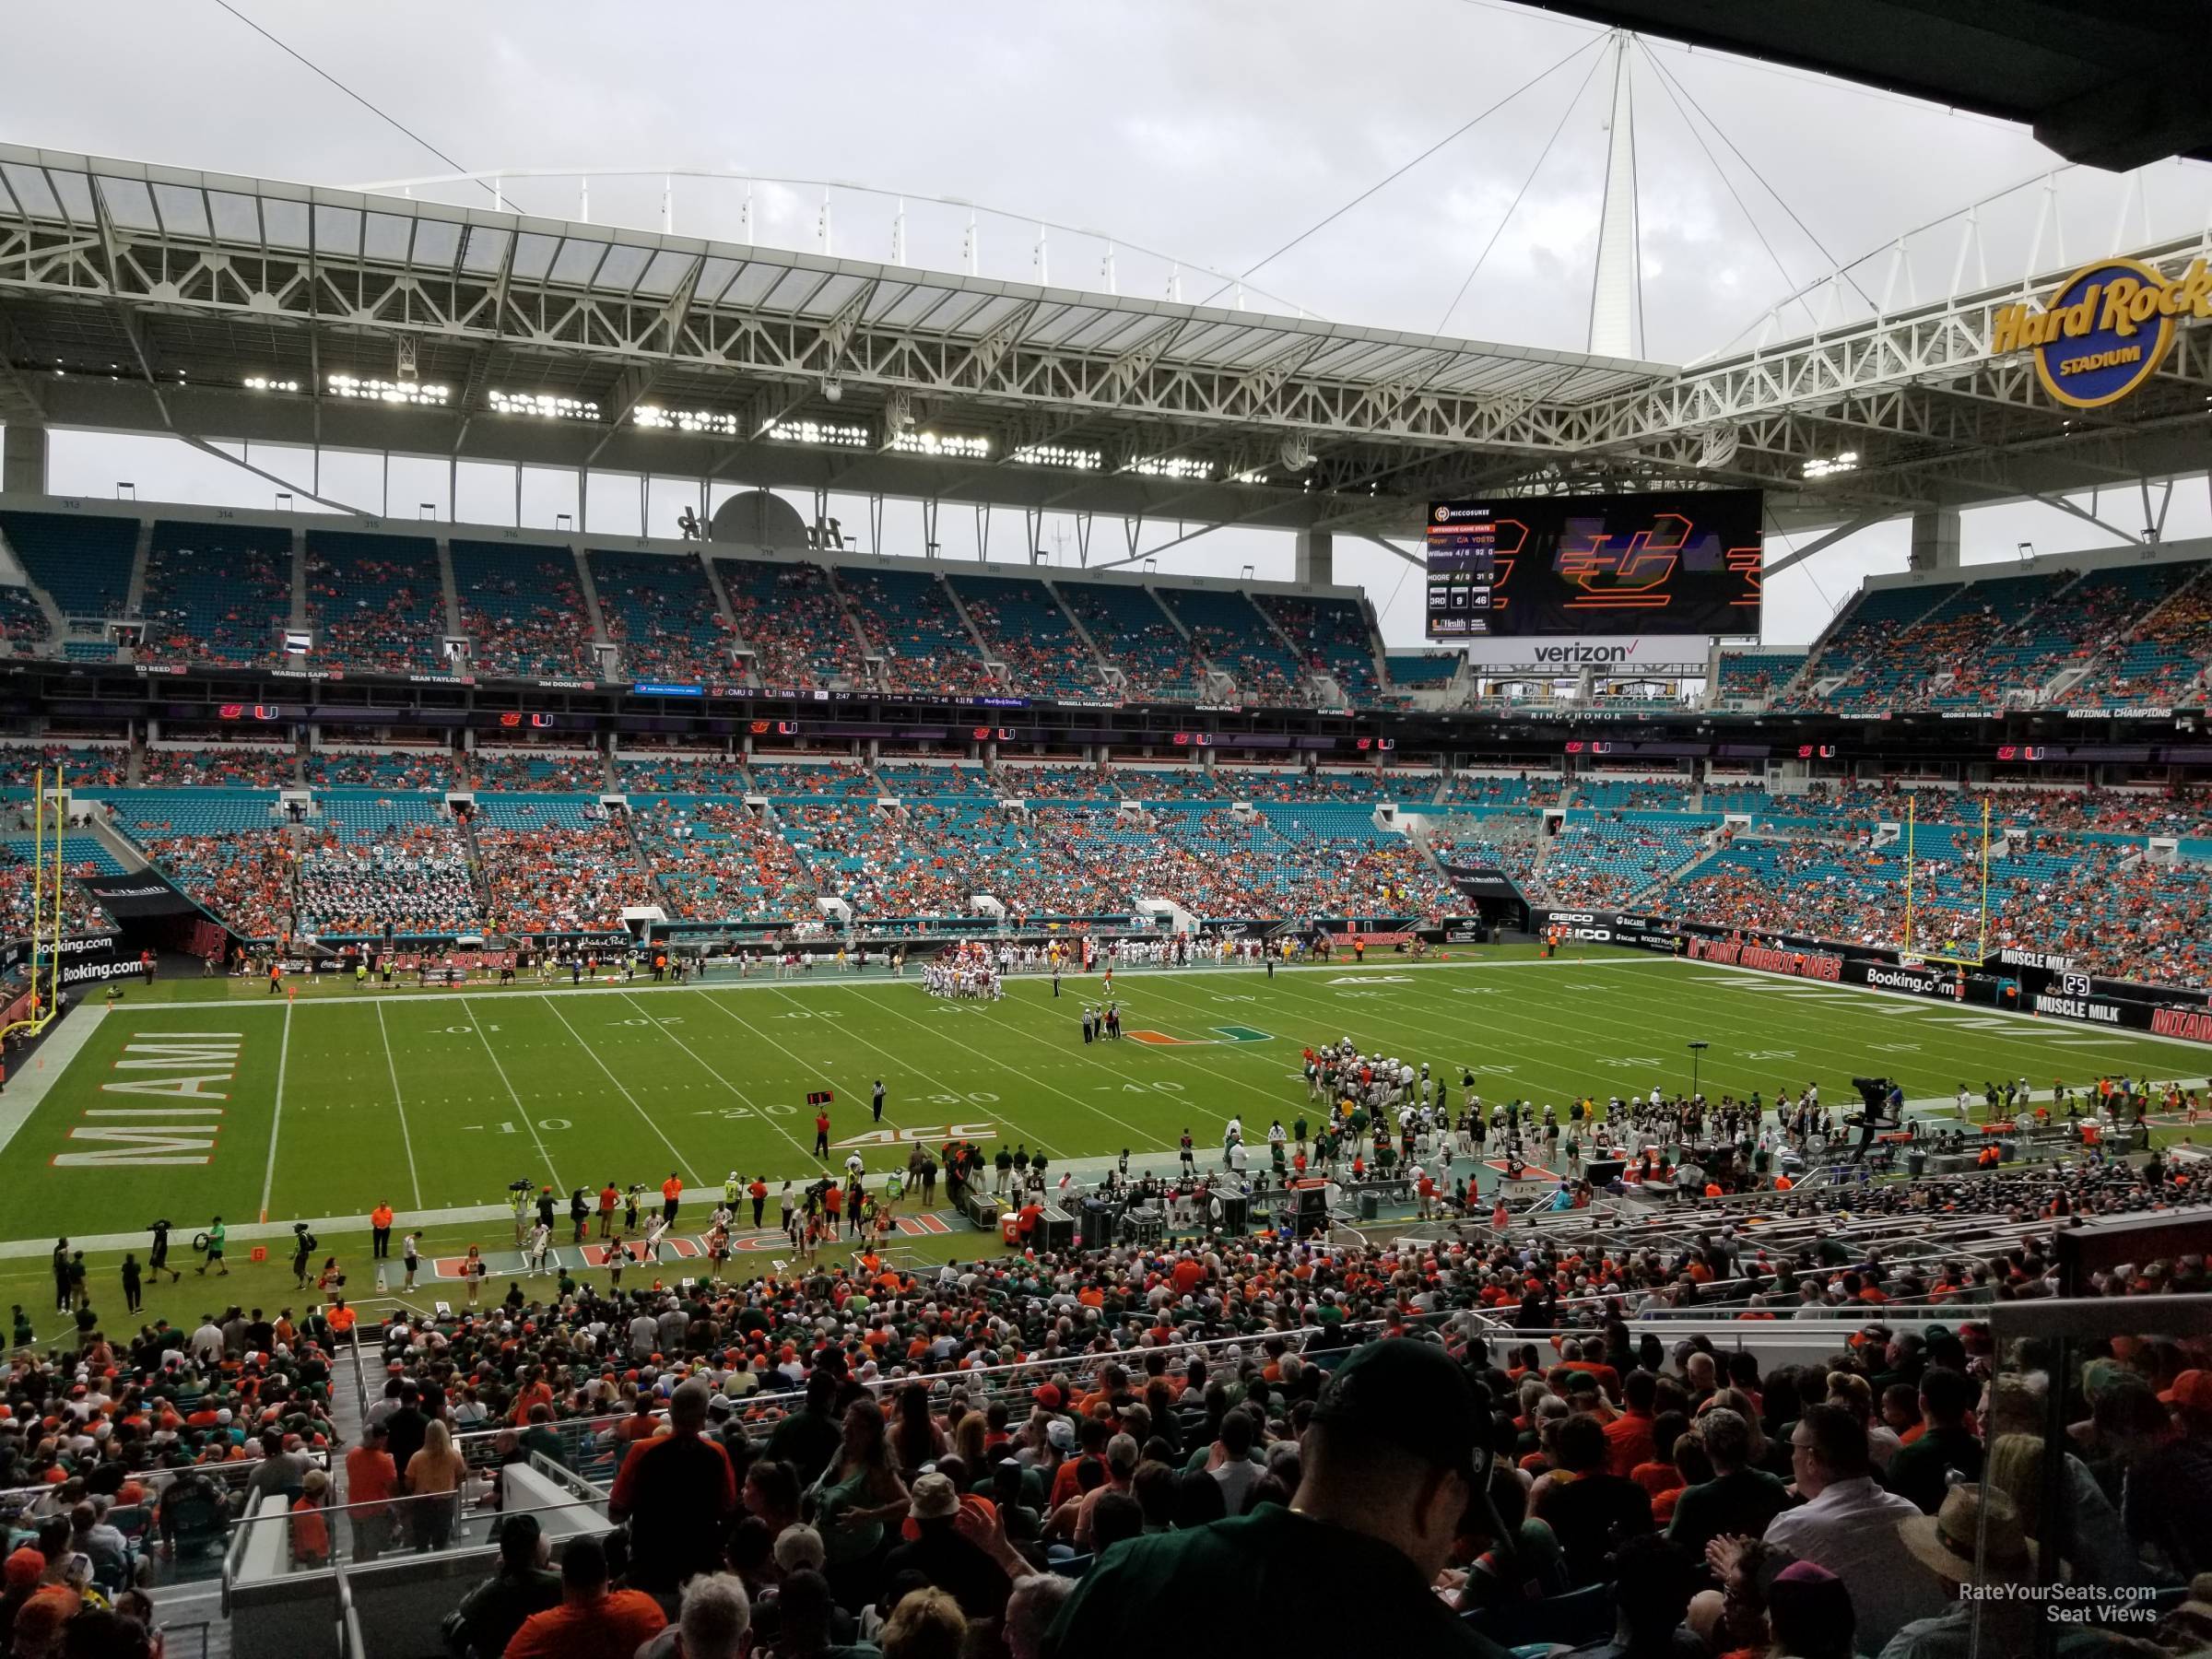 section 250, row 19 seat view  for football - hard rock stadium